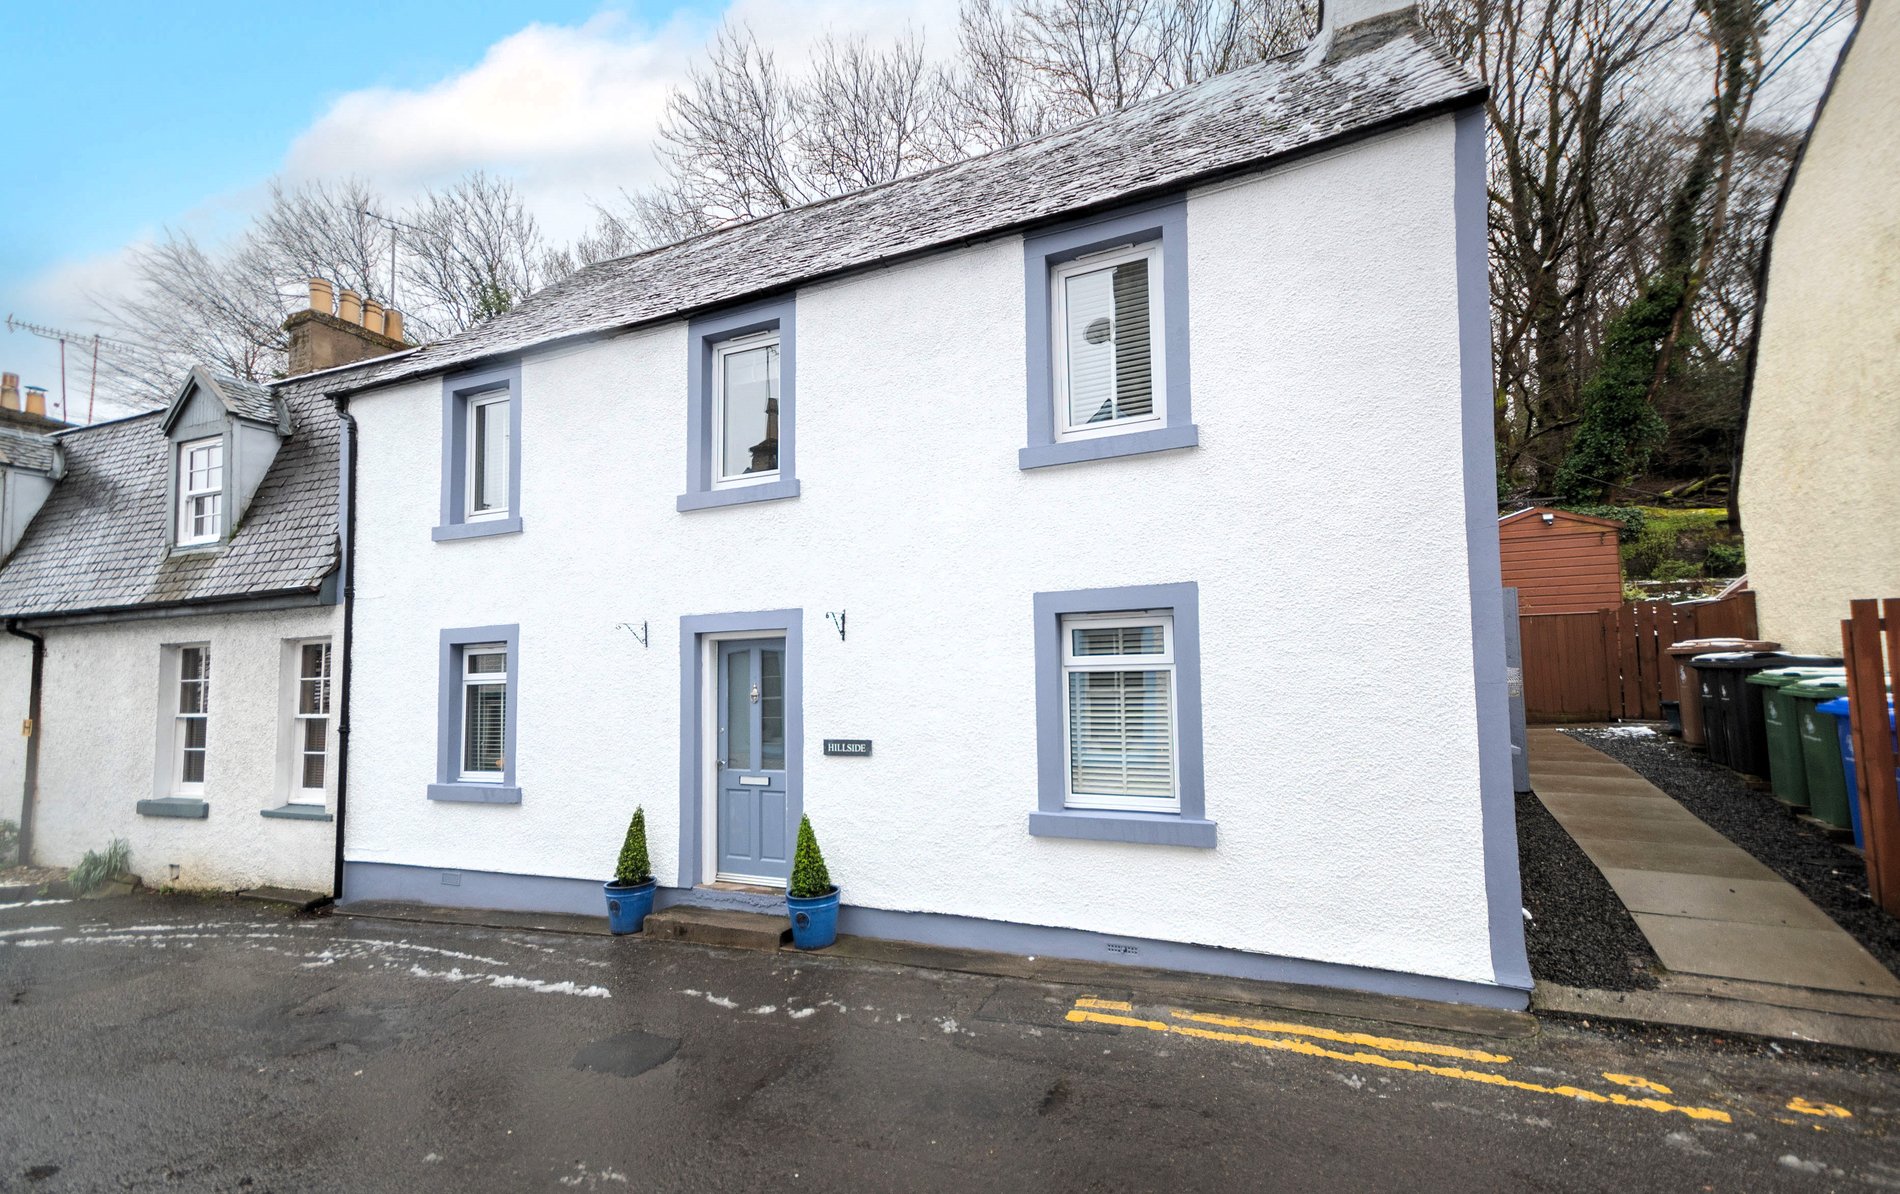 4 bed cottage for sale in Ramoyle, Dunblane - Property Image 1